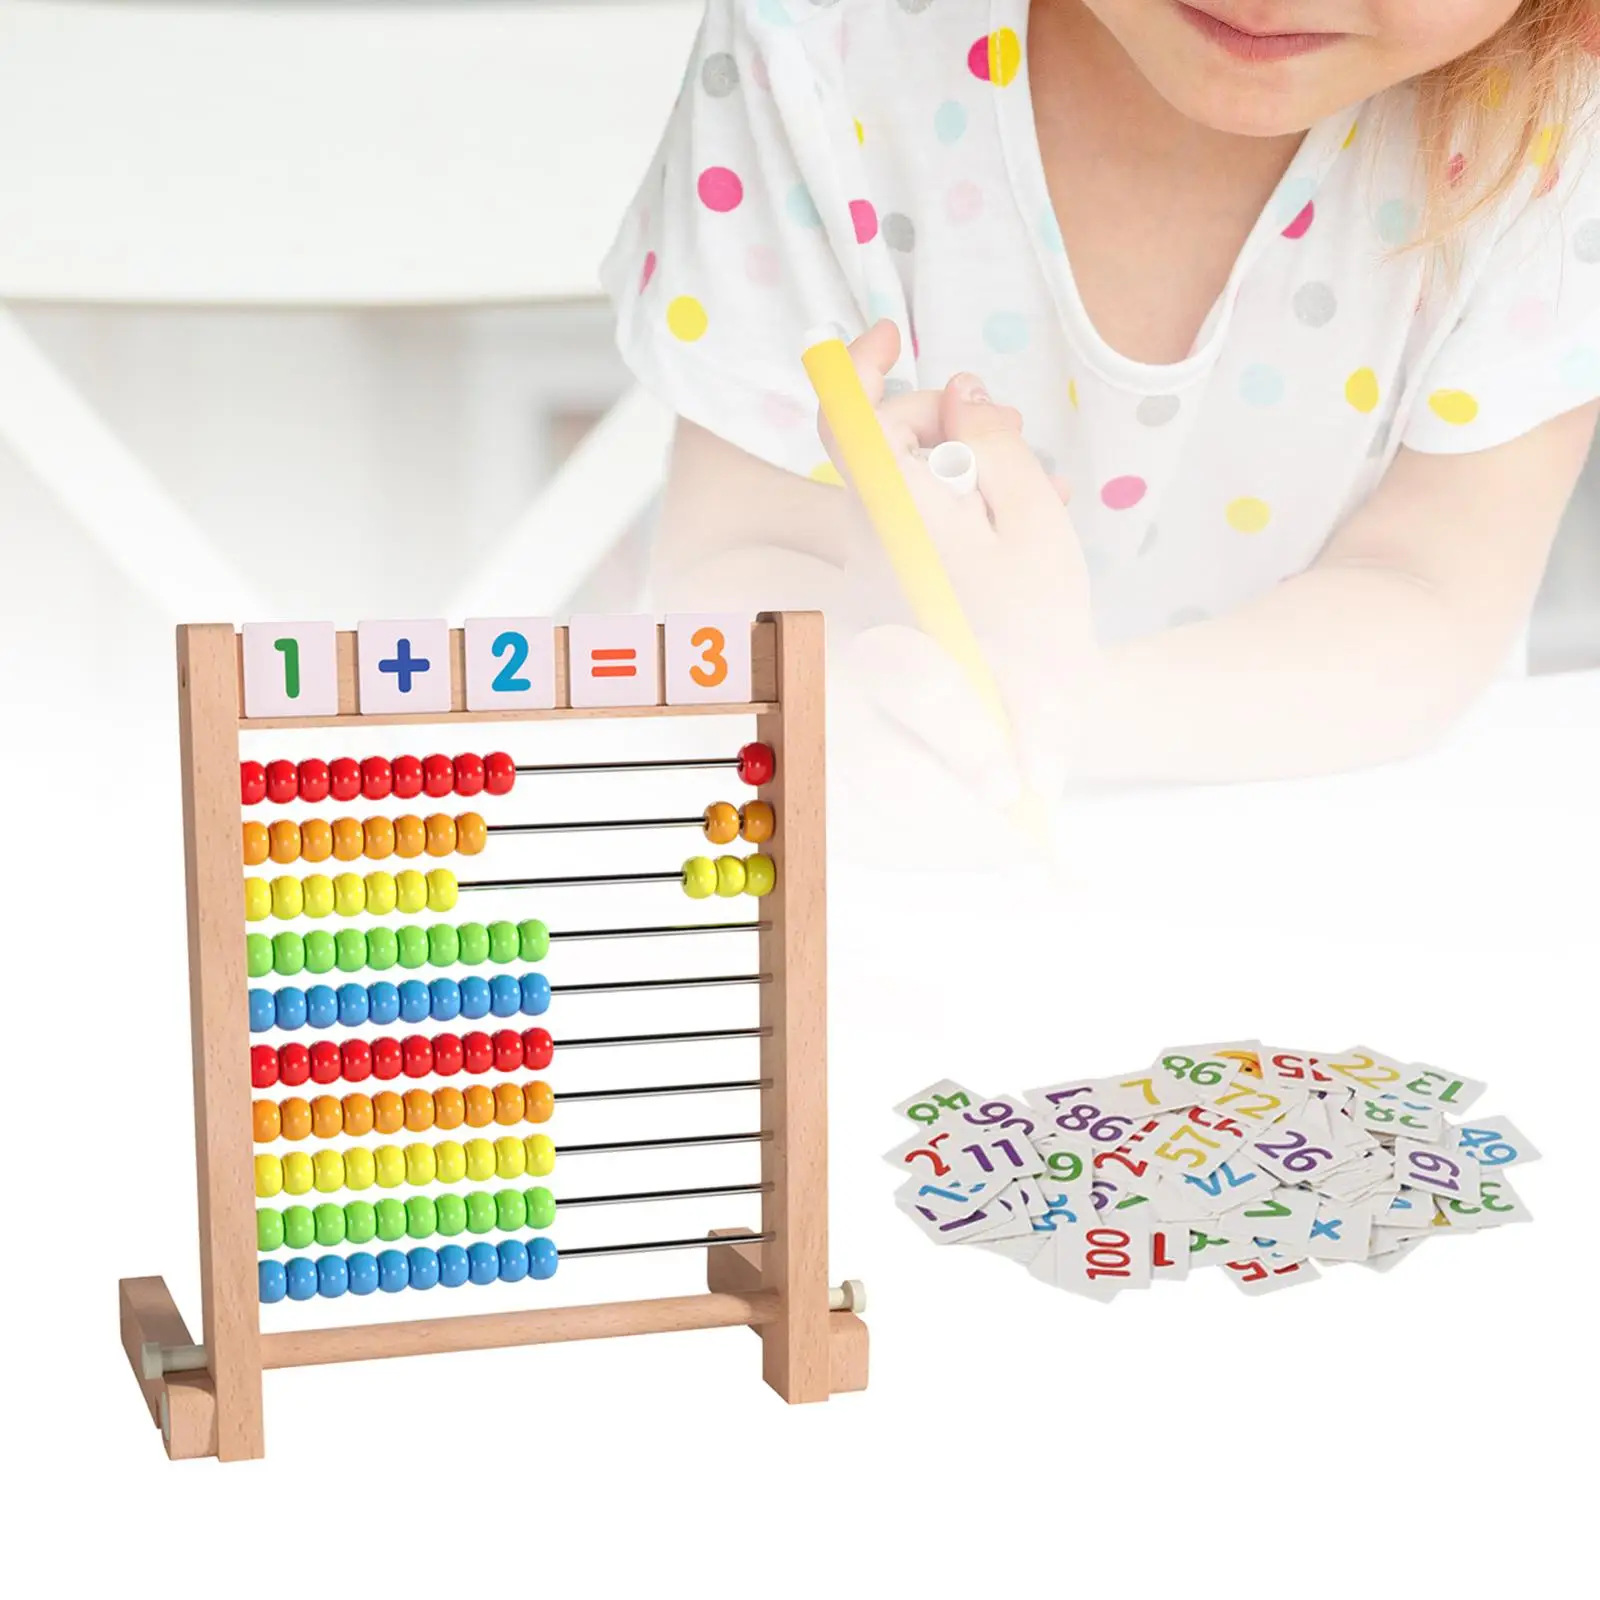 Wooden Abacus Math Manipulatives Ten Frame Set Smooth Edges Montessori Educational Counting Toy for Children Kids Toddlers